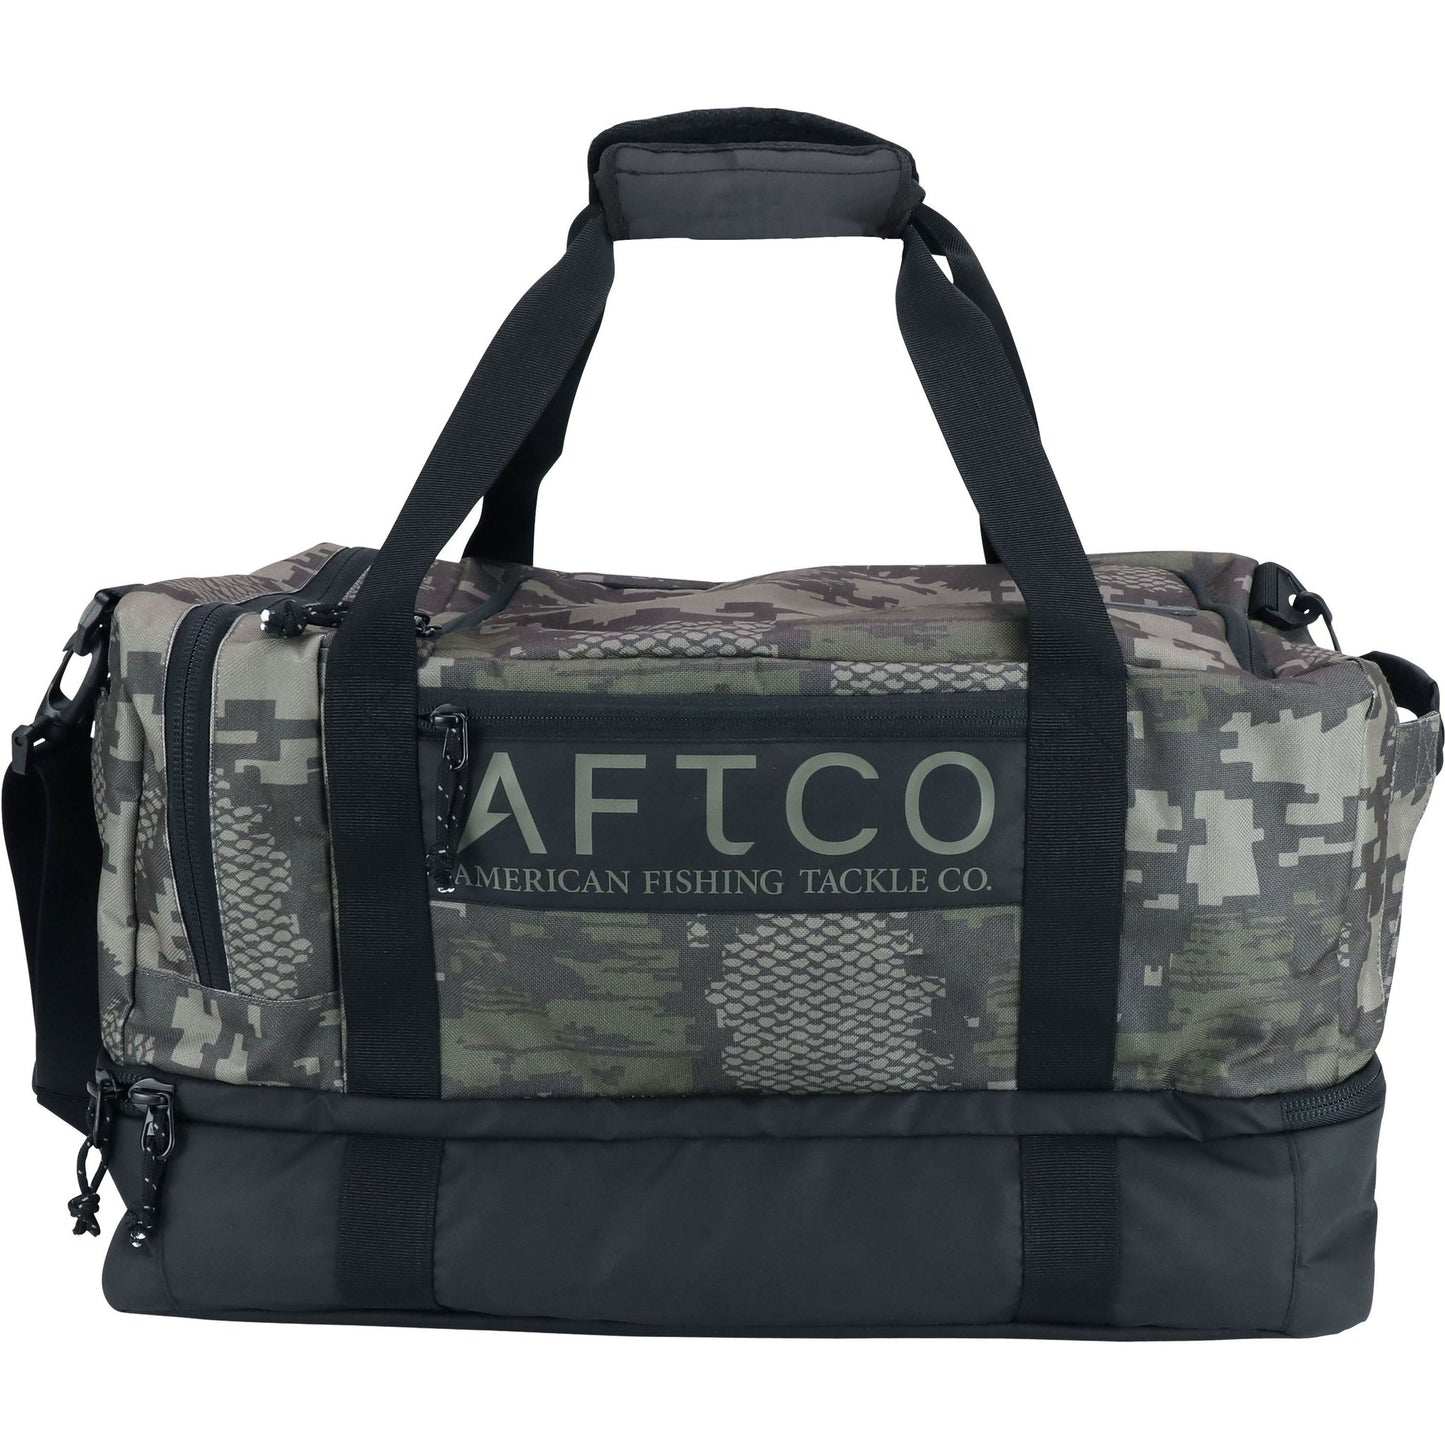 Aftco Overnight Bag - Dogfish Tackle & Marine